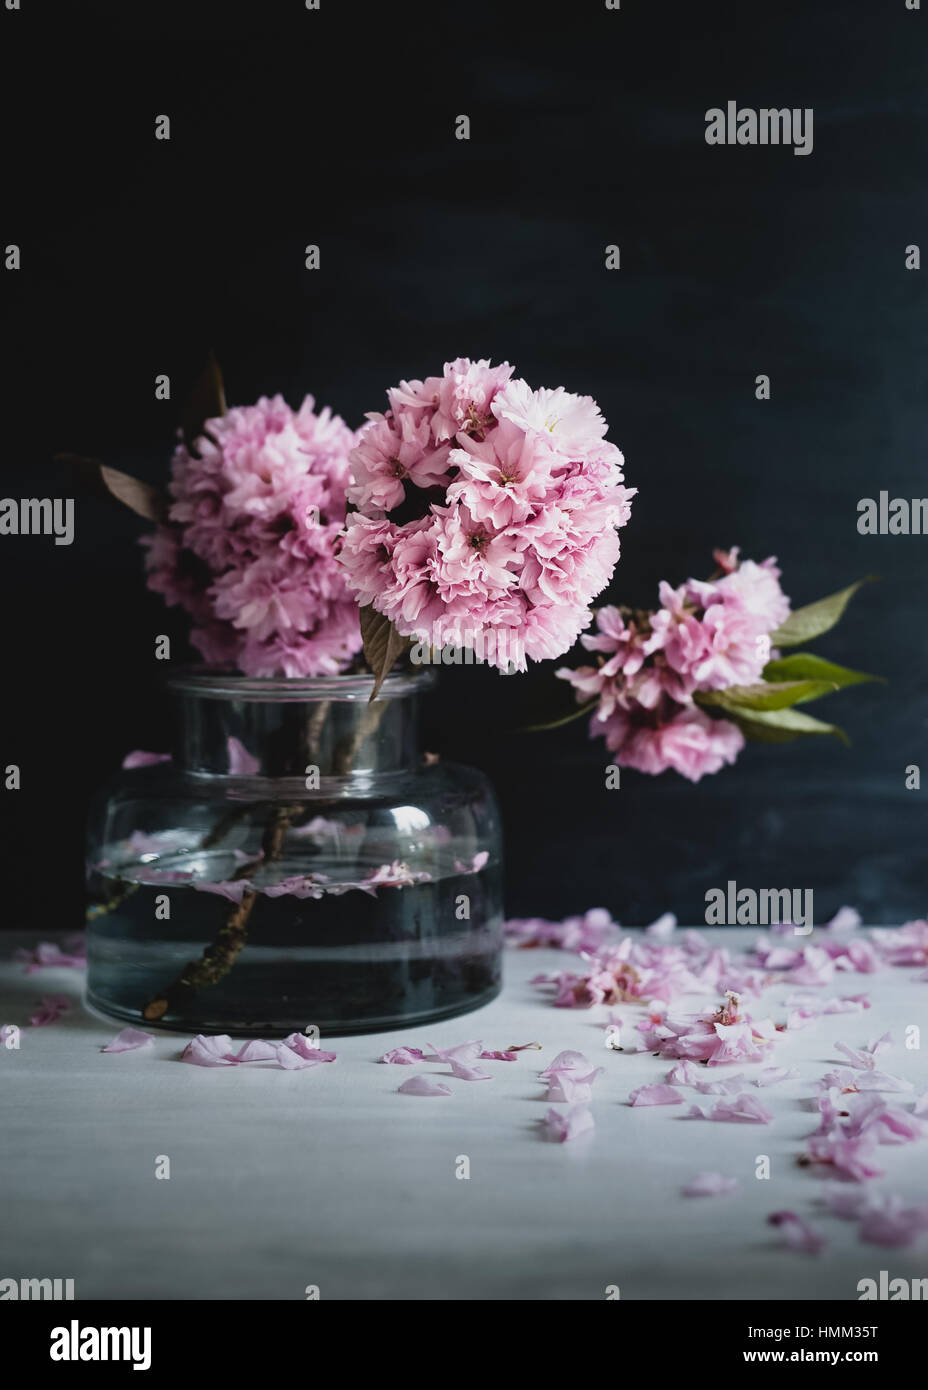 moody still life with pink cherry blossom branches in glass vase, dark background and selective focus Stock Photo